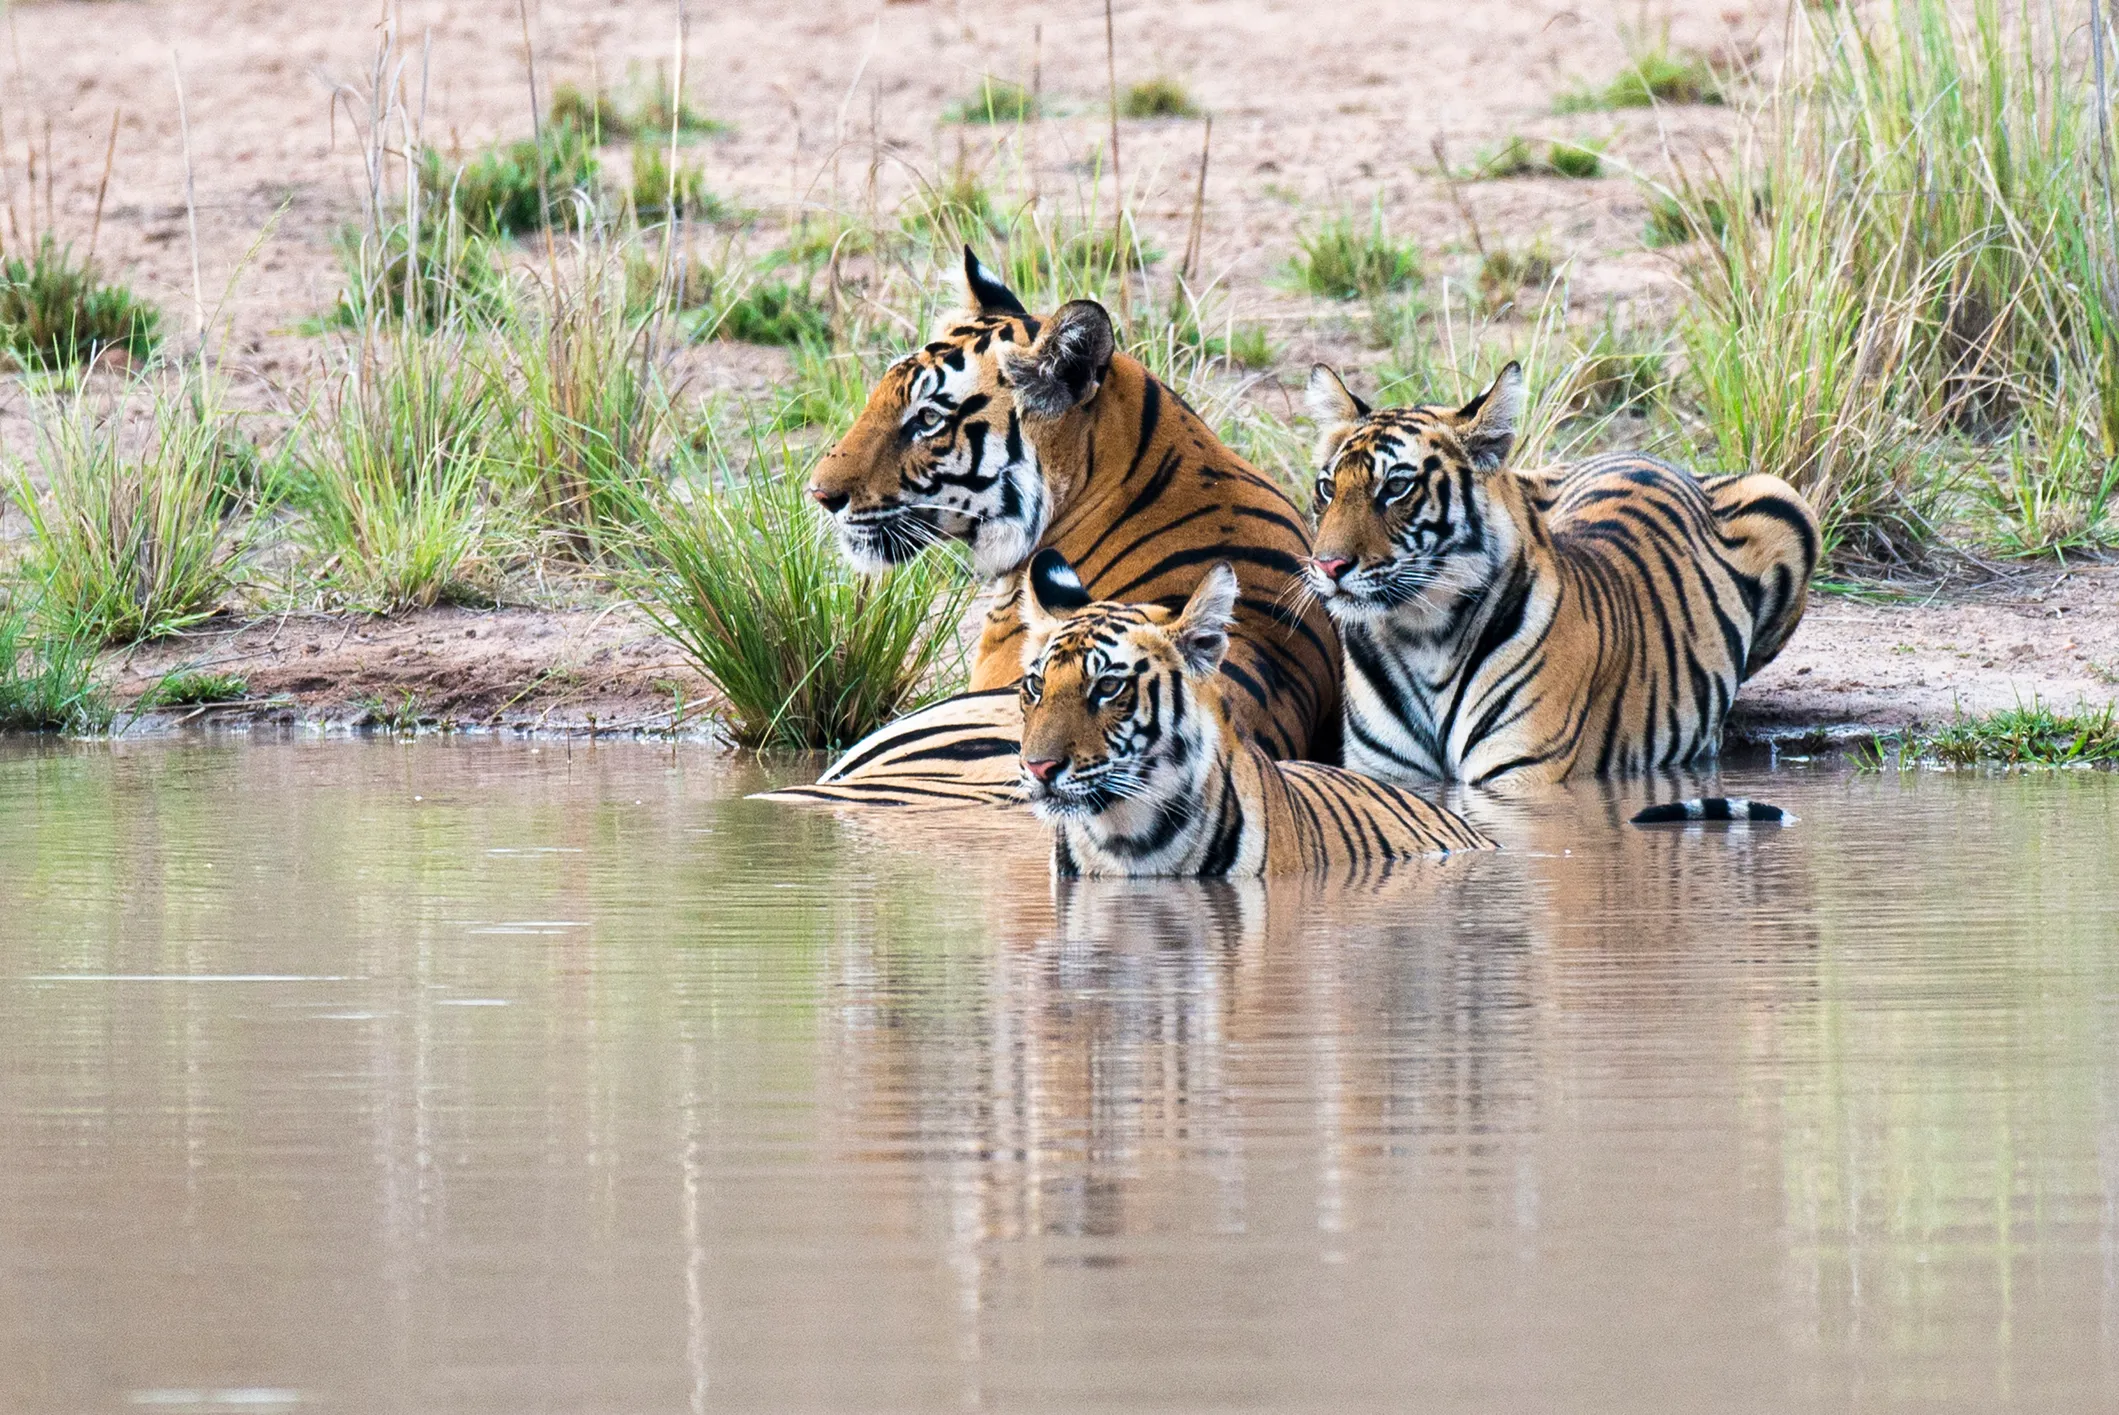 Tiger guide: species facts, how they hunt and where to see in the wild -  Discover Wildlife